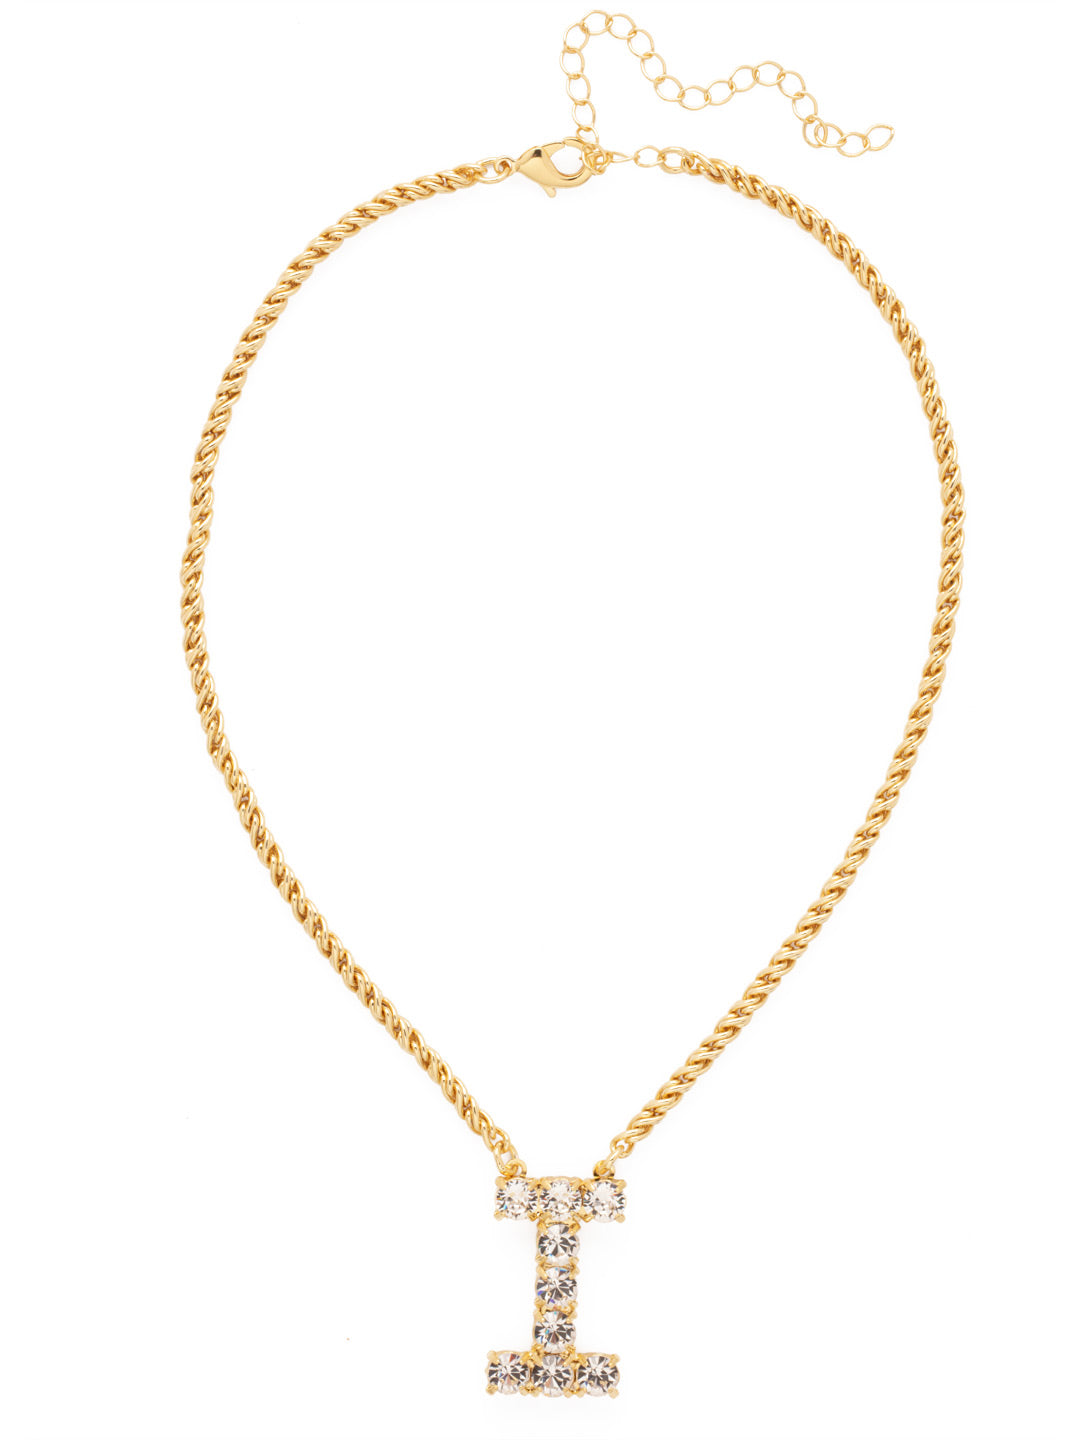 I Initial Rope Pendant Necklace - NFK28BGCRY - <p>The Initial Rope Pendant Necklace features a crystal encrusted metal monogram pendant on an adjustable rope chain, secured with a lobster claw clasp. From Sorrelli's Crystal collection in our Bright Gold-tone finish.</p>